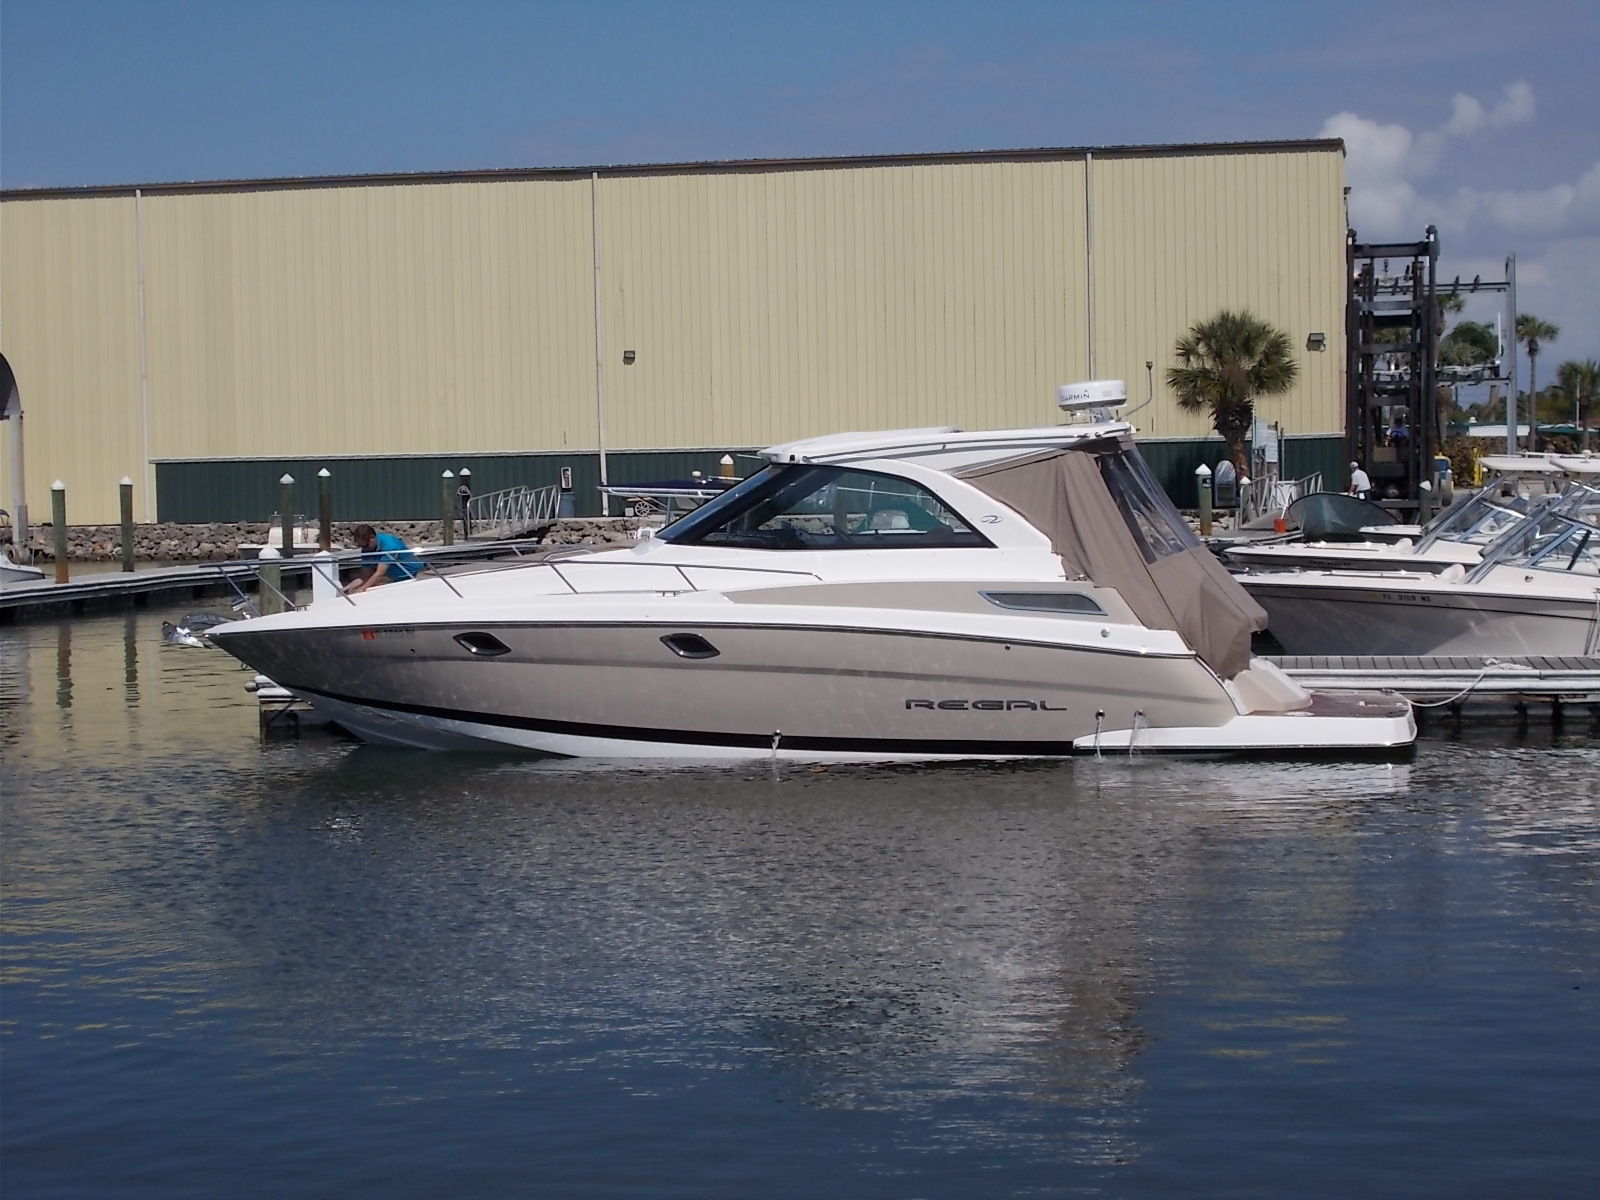 Regal 35 Sport Coupe 2012 for sale for $188,000 - Boats ...